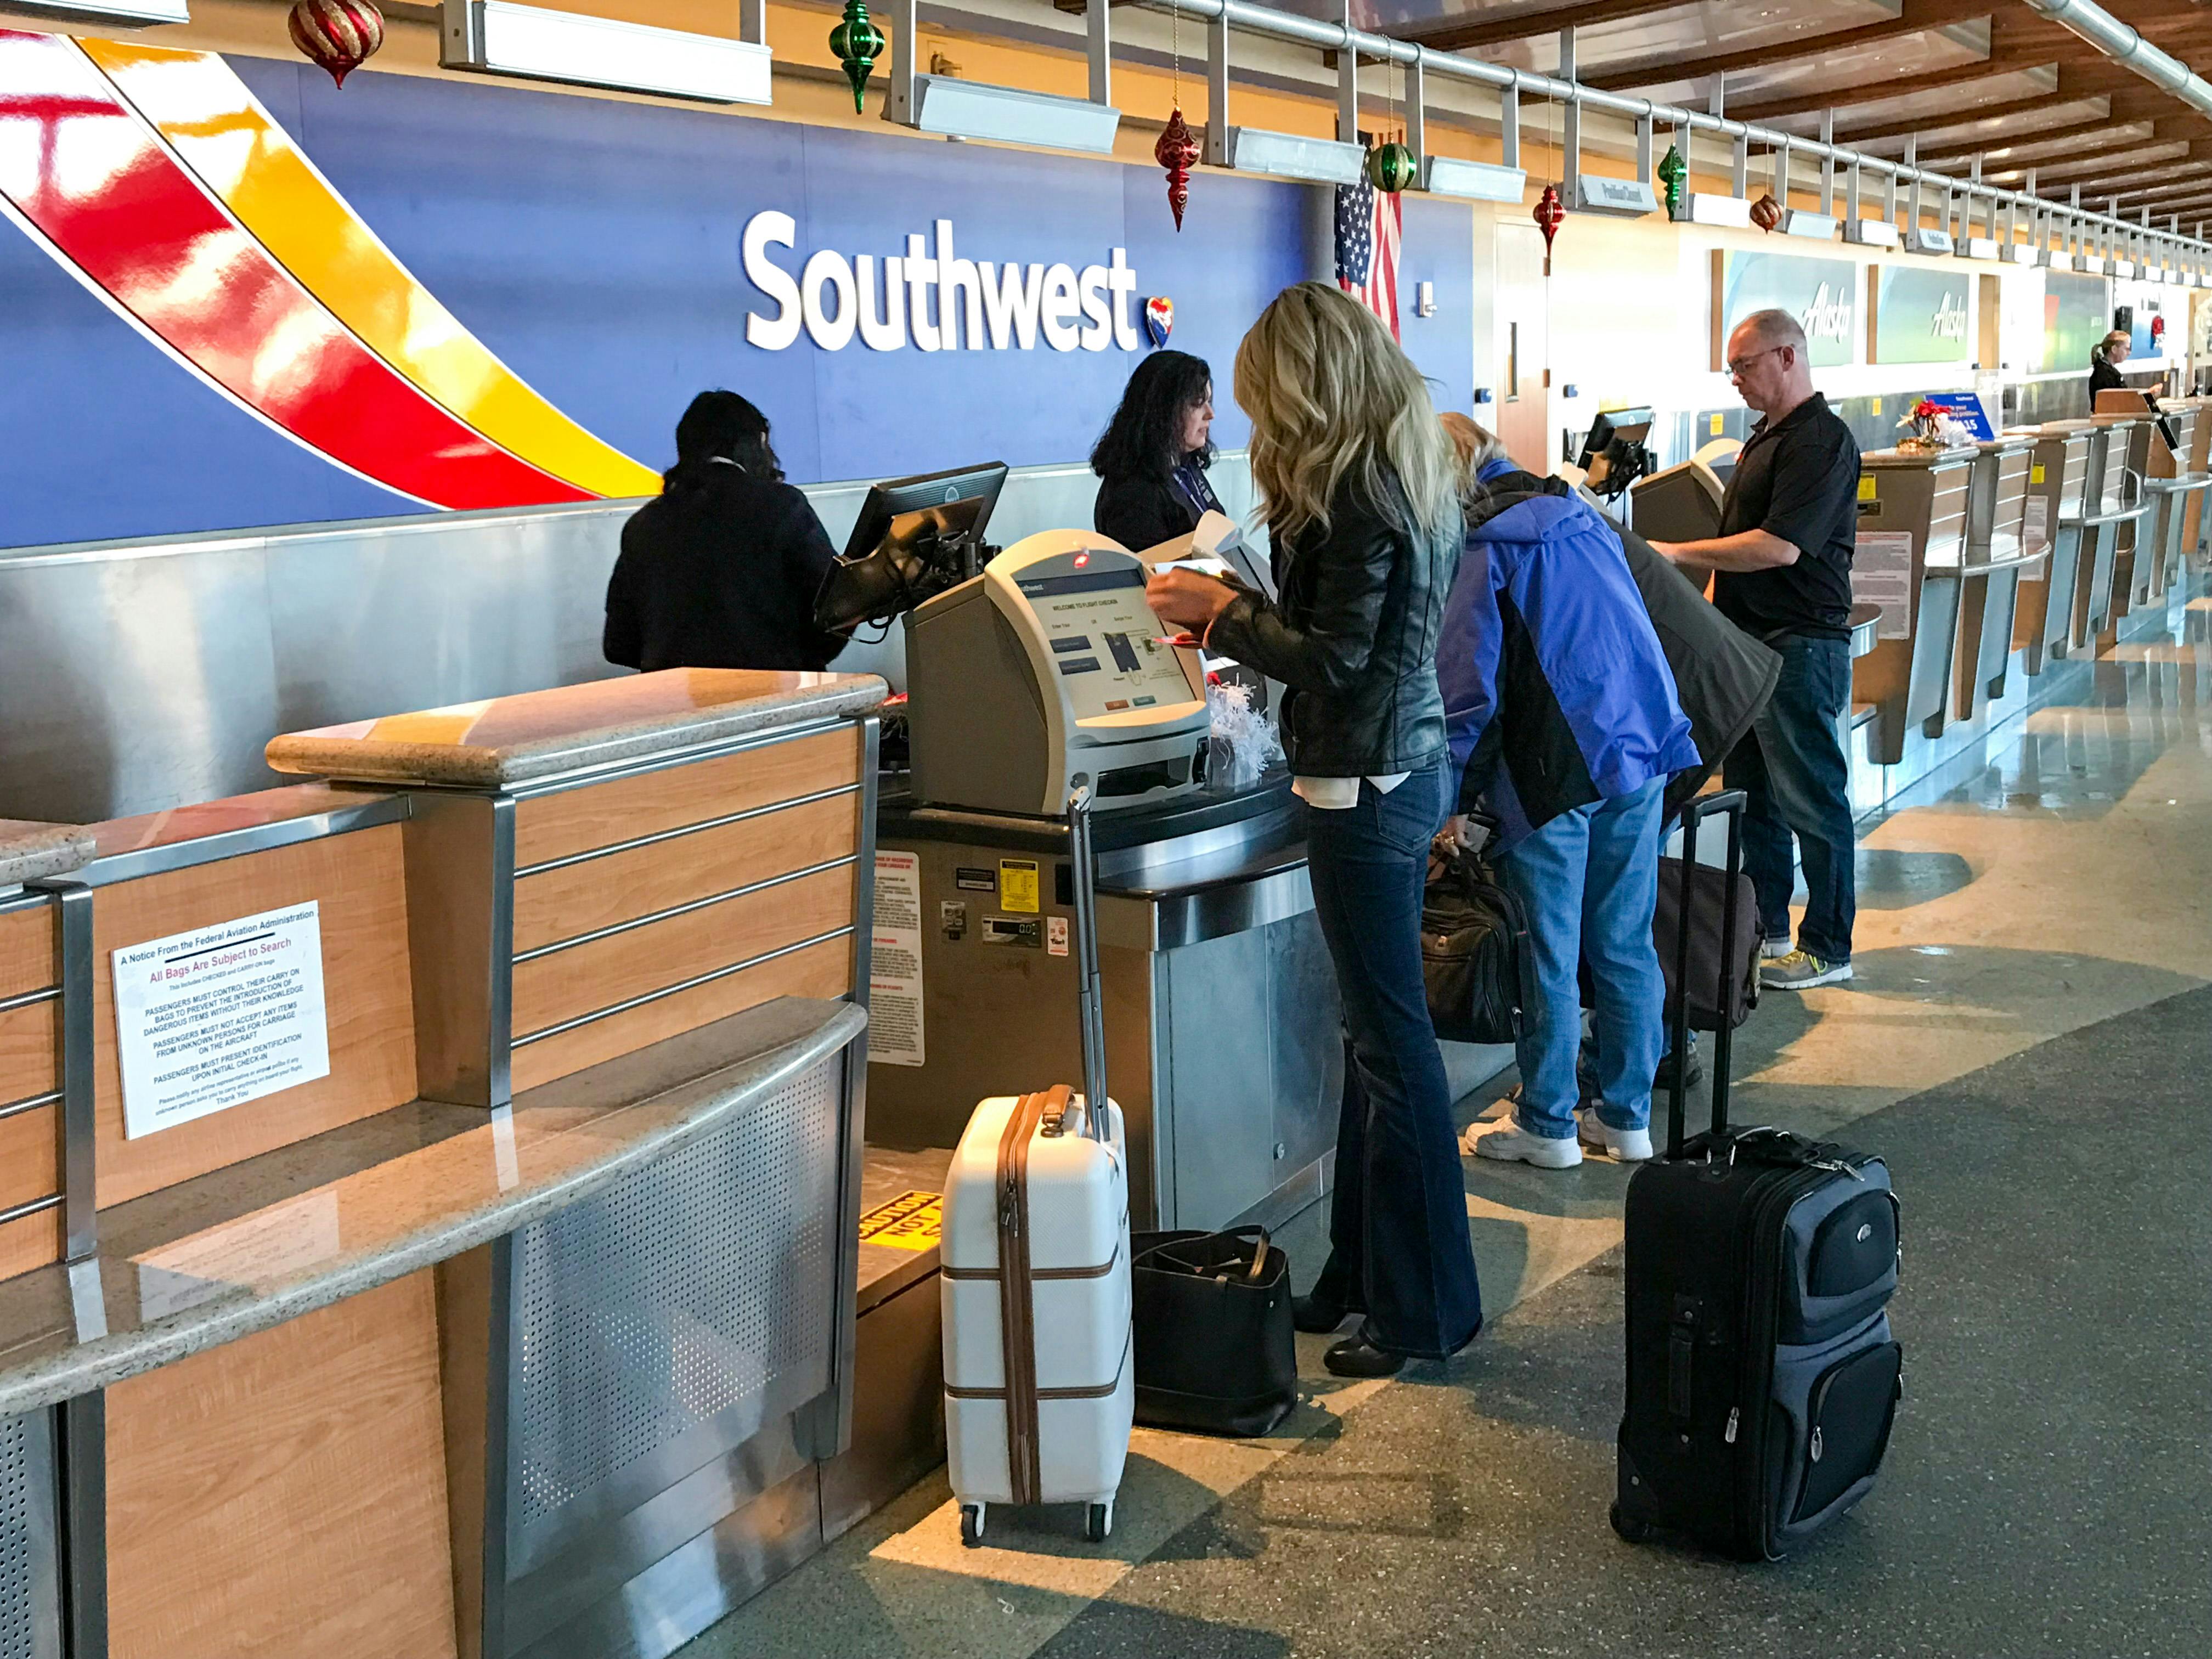 A person standing at the Southwest airlines check in desk at the airport